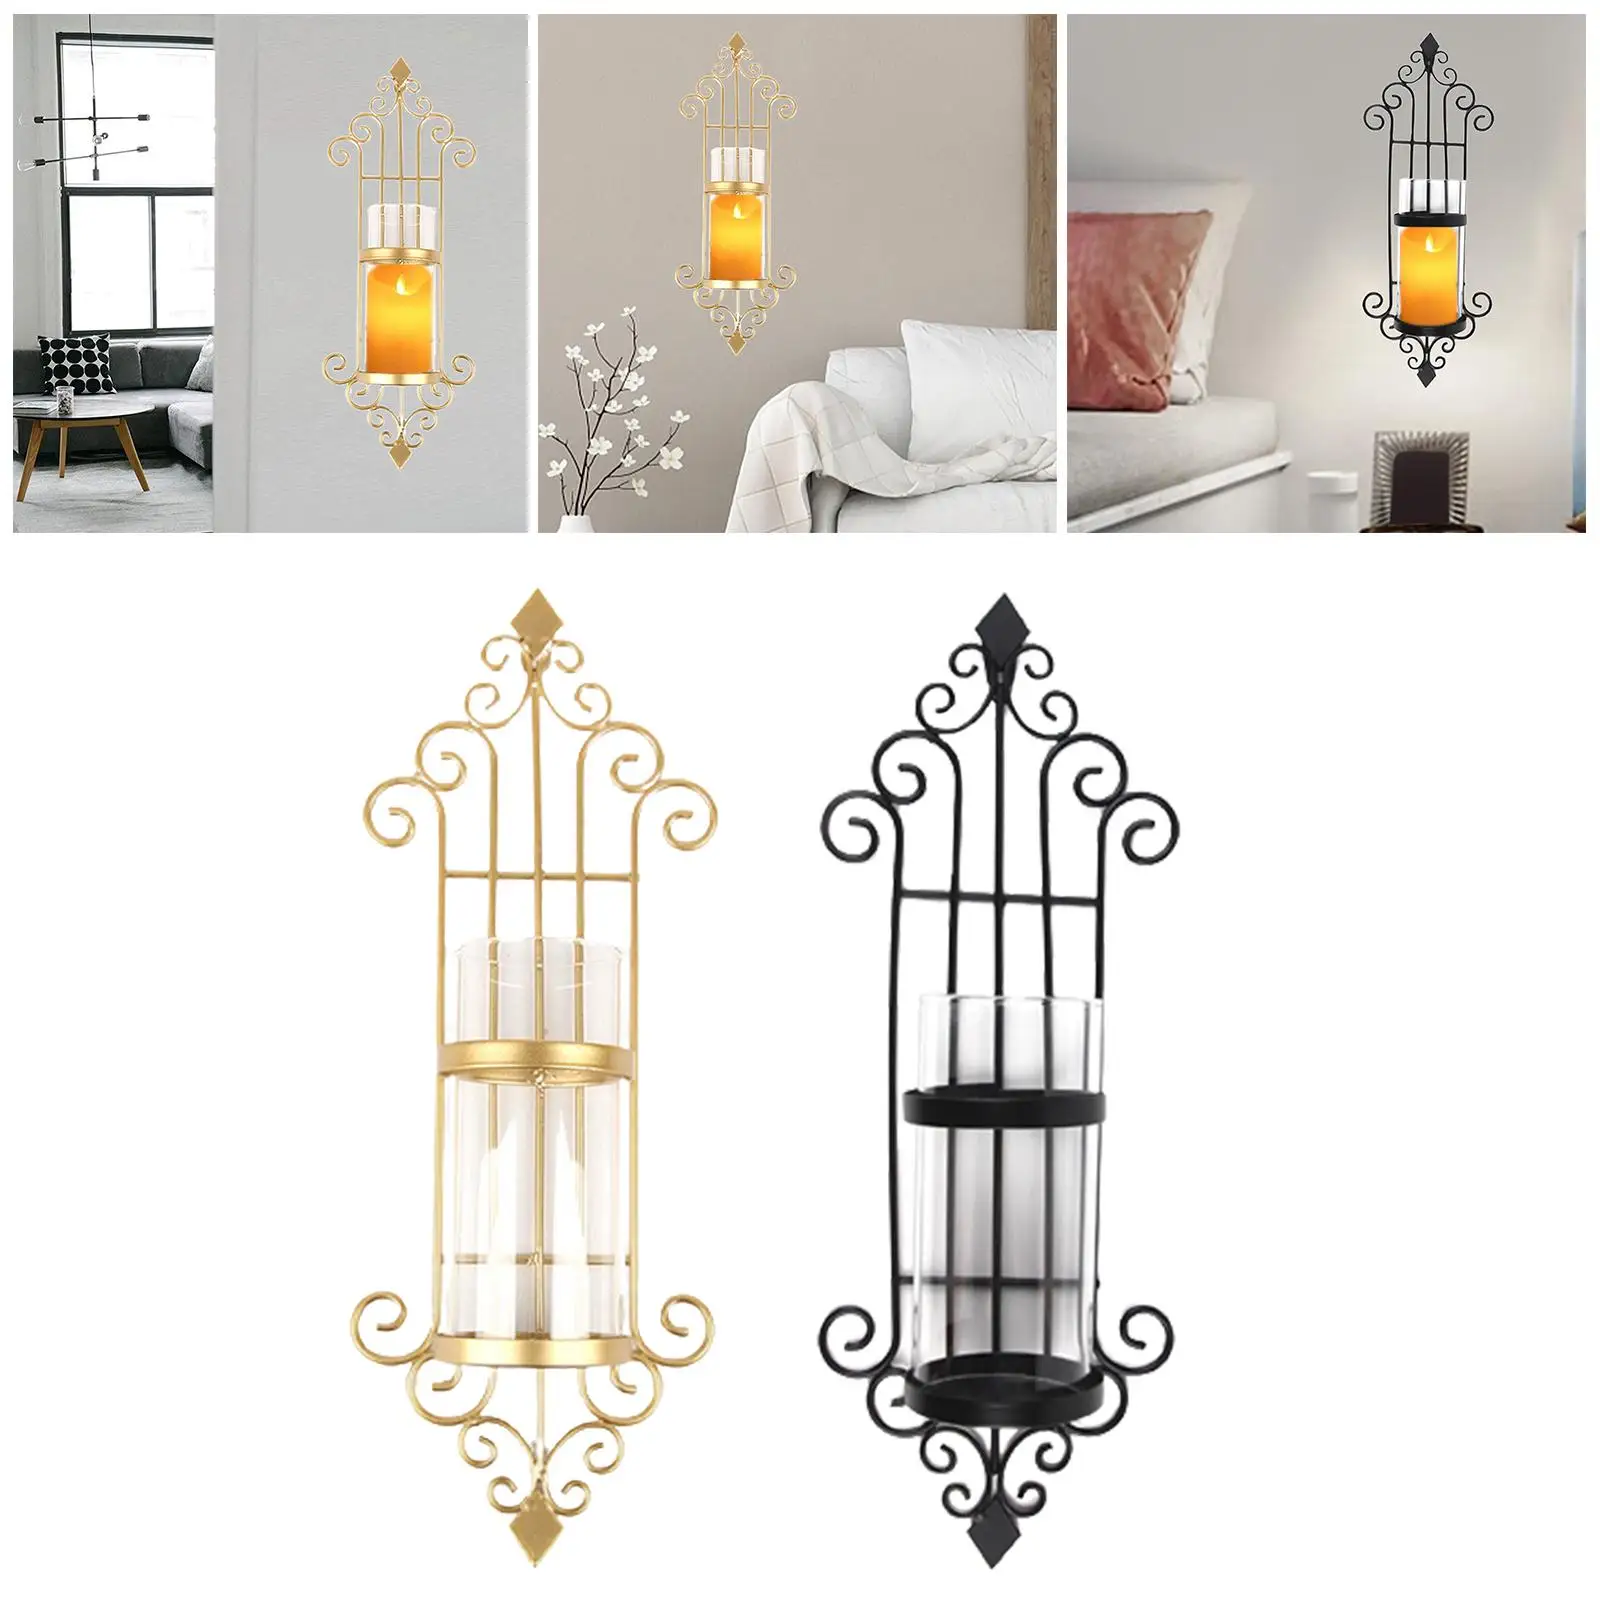 Wall Candle Sconce Set of 2 Wrought Iron Candle Holder Hanging Wall Mounted Candle Sconces for Living Room Home Decor